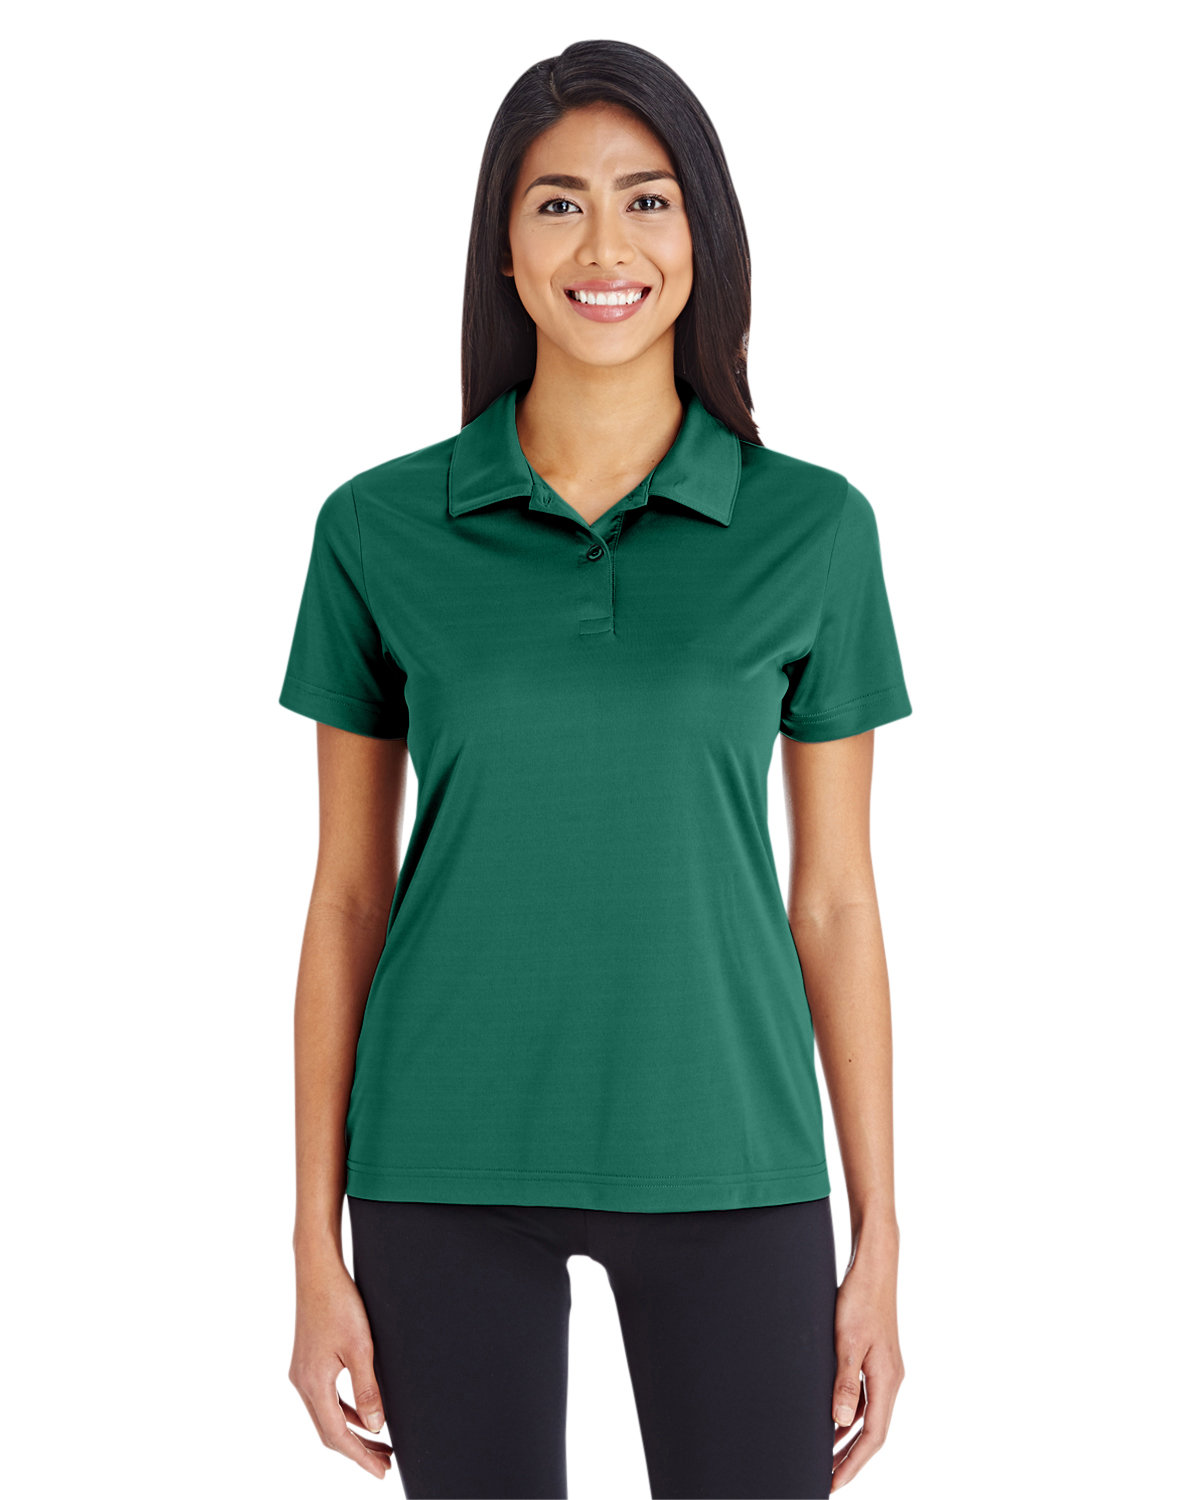 Team 365 Ladies' Zone Performance Polo SPORT FOREST 